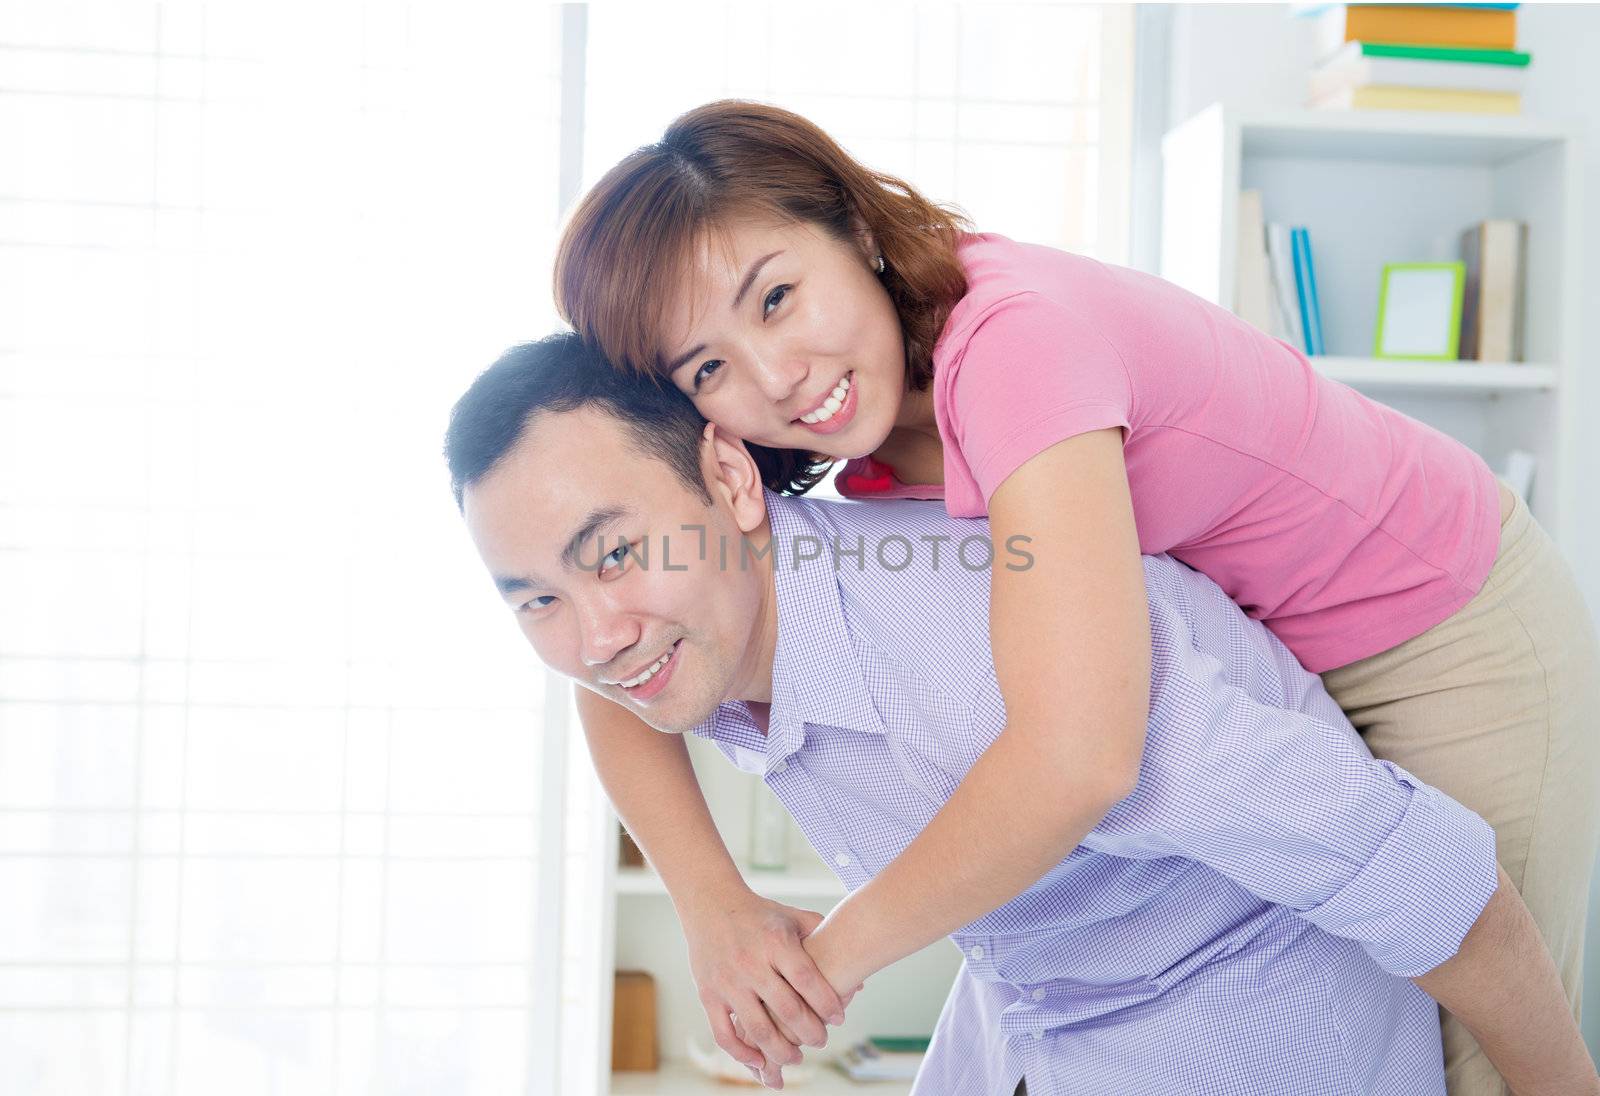 Portrait of a young Asian man giving piggyback to woman indoor.